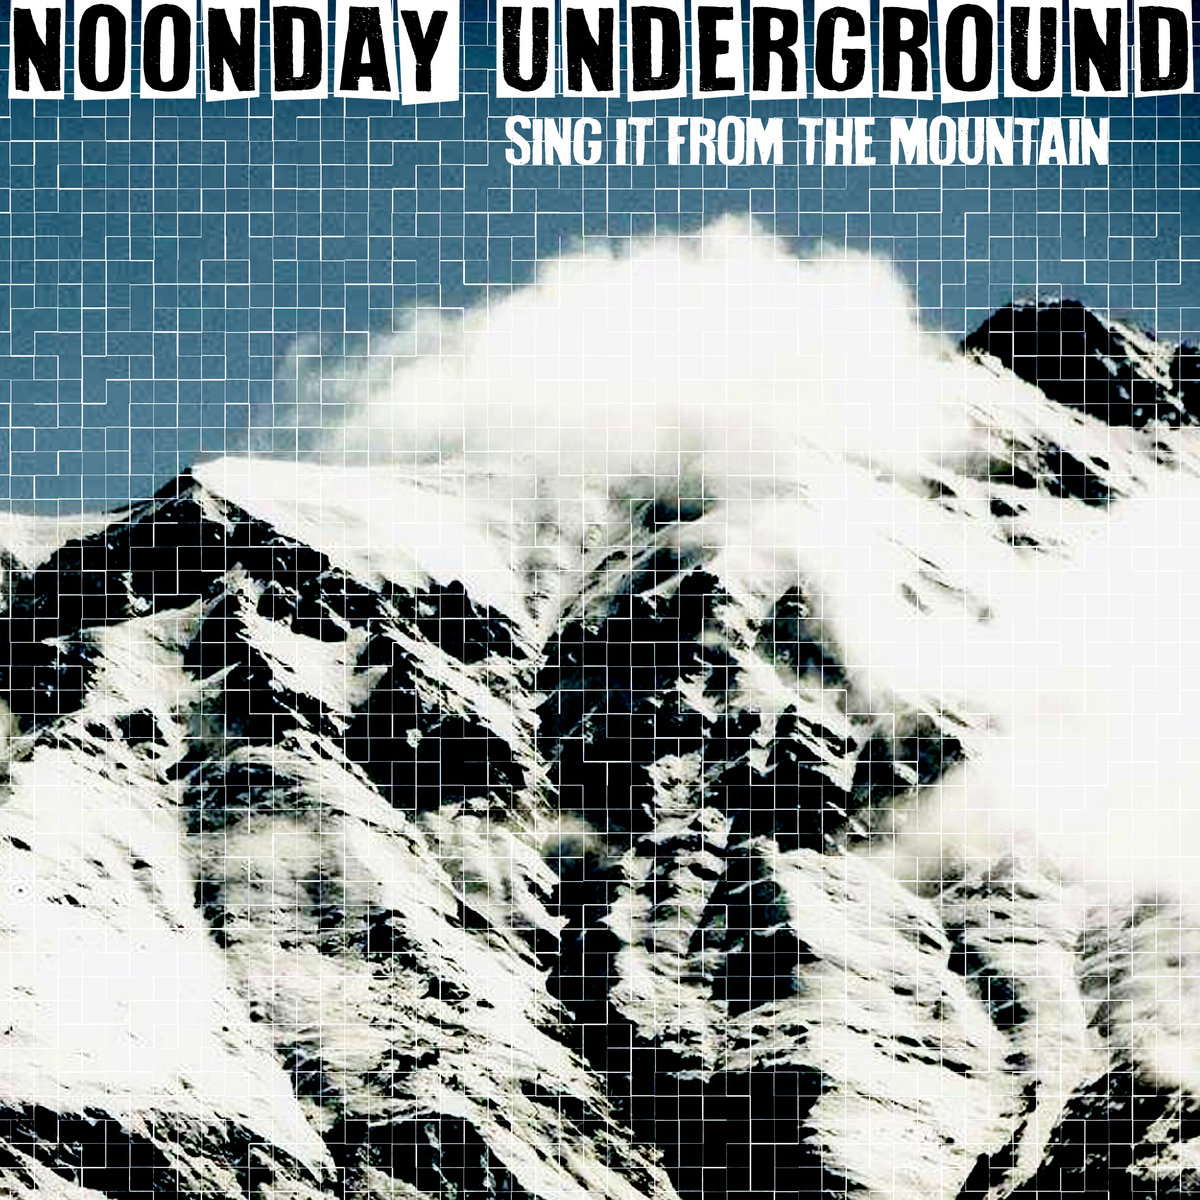 Listen Up – Noonday Underground – Sing It From The Mountain